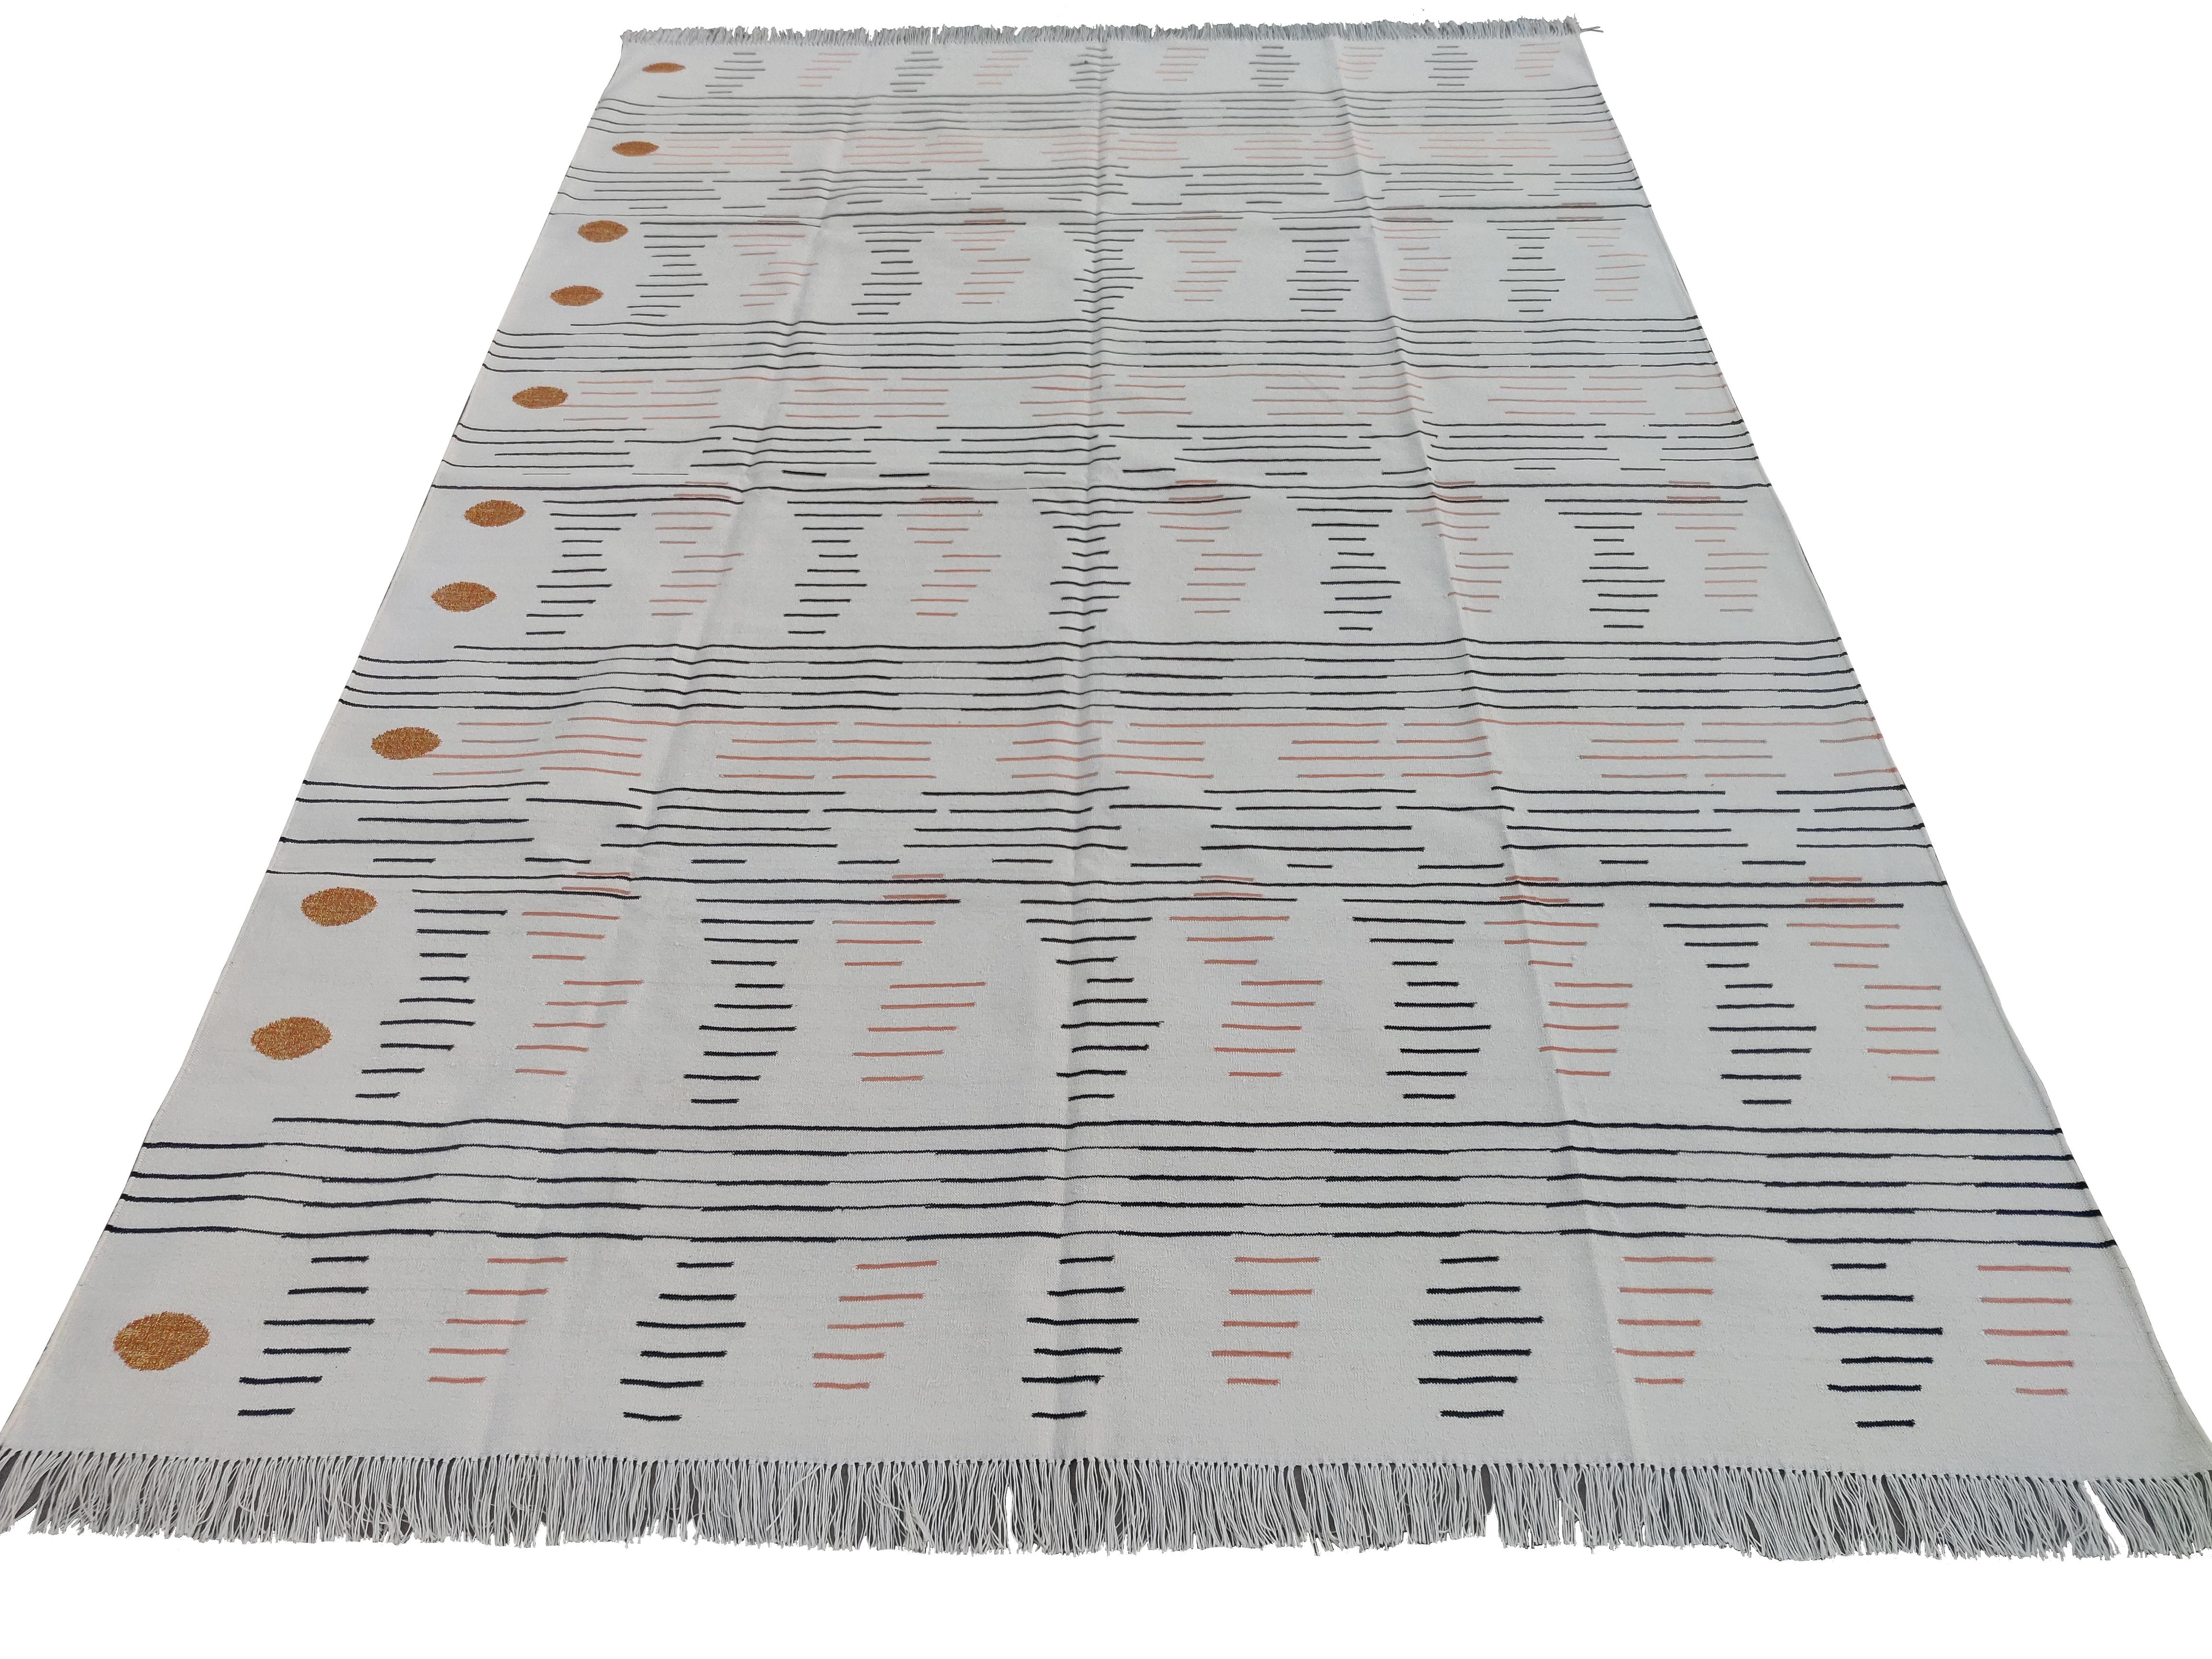 Handmade Cotton Area Flat Weave Rug, 6x9 White And Black Striped Indian Dhurrie In New Condition For Sale In Jaipur, IN